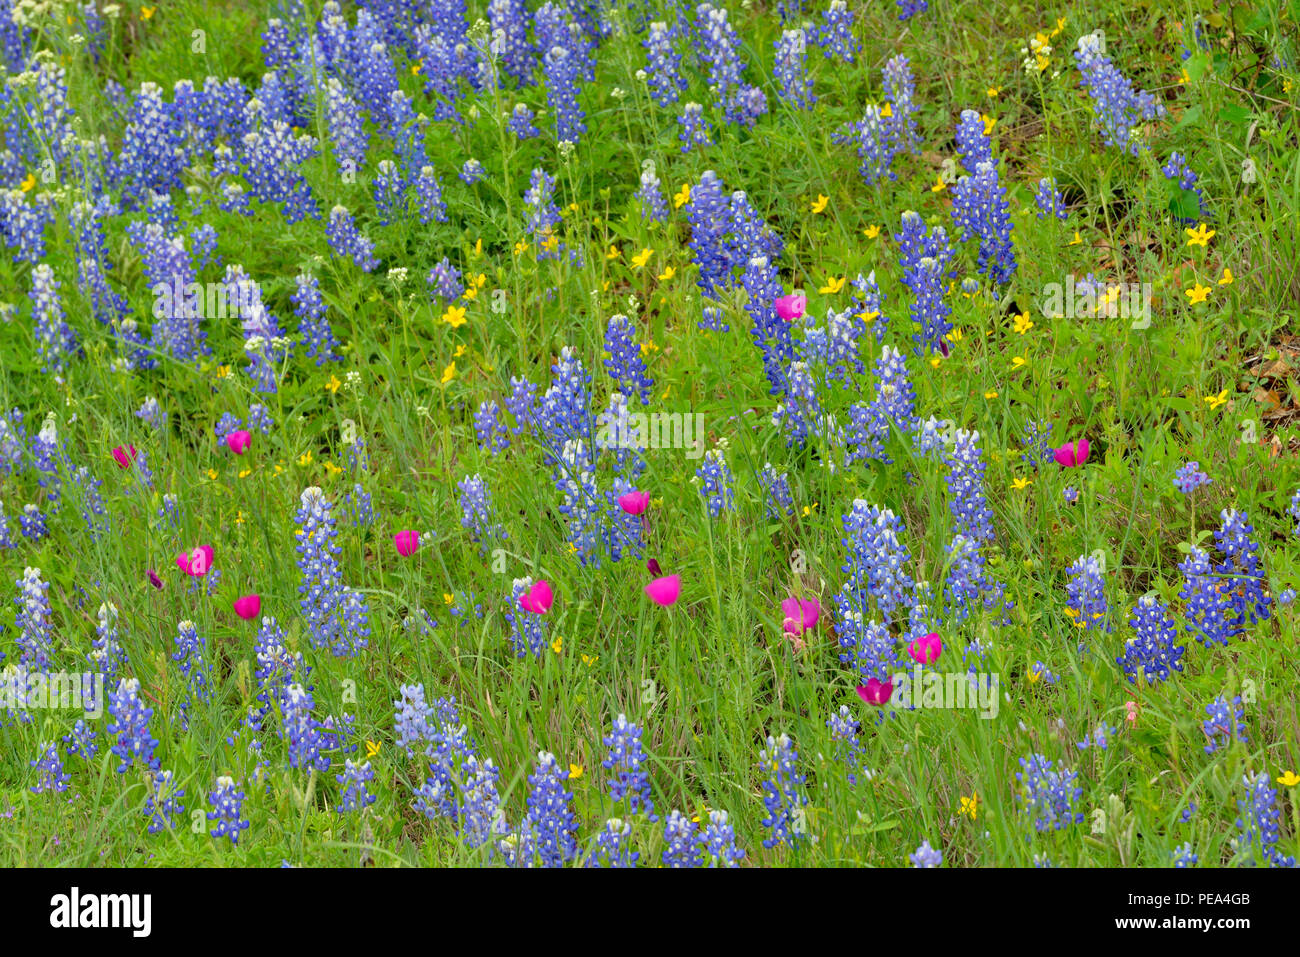 Roadside wildflowers- bluebonnets and winecup, Burnet County, Texas, USA Stock Photo